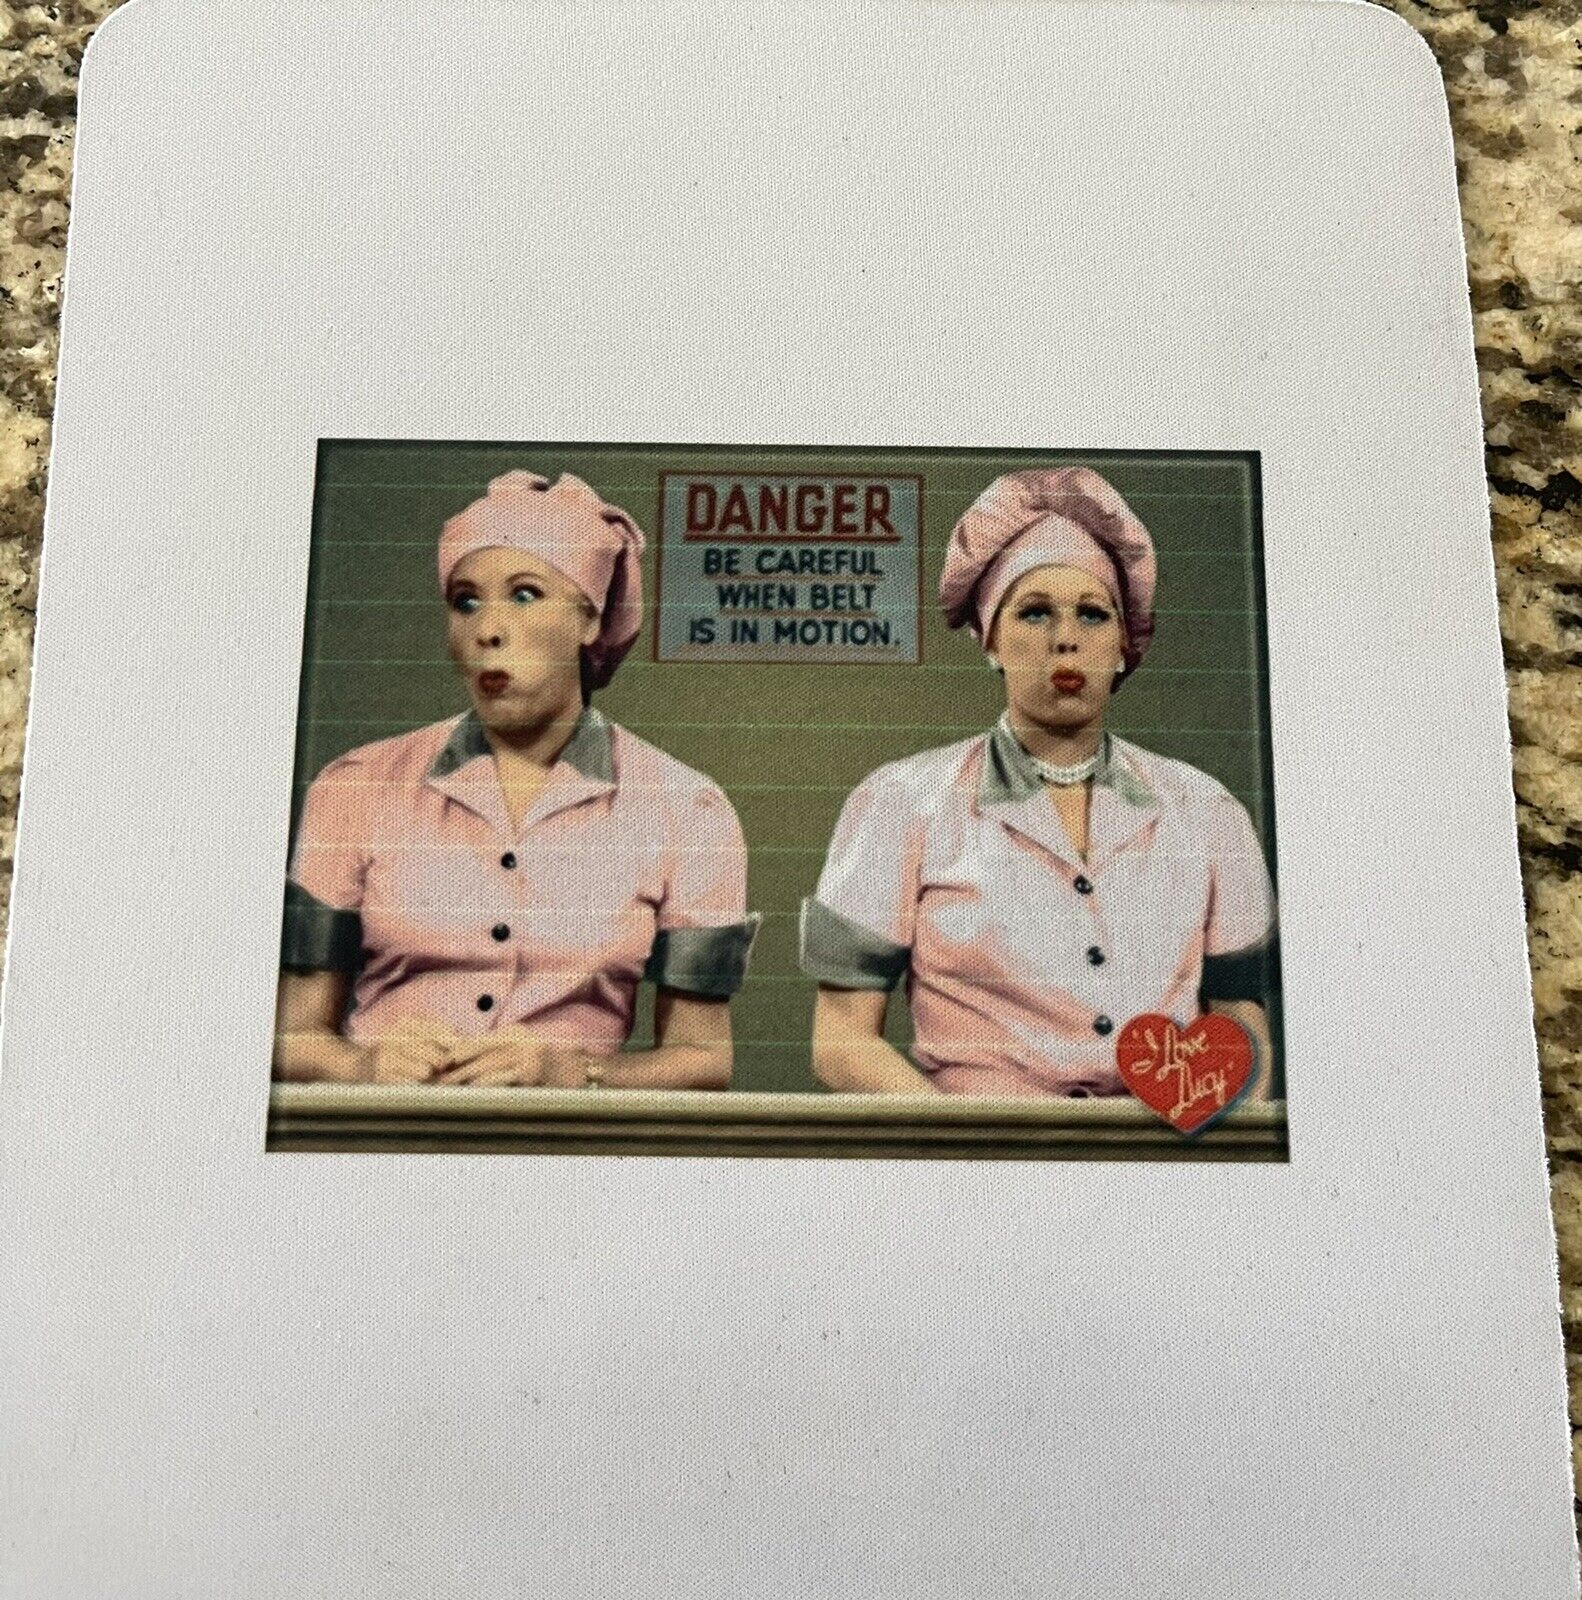 New Custom Printed Mouse Pad “I Love Lucy” Chocolate Factory Episode 🔥